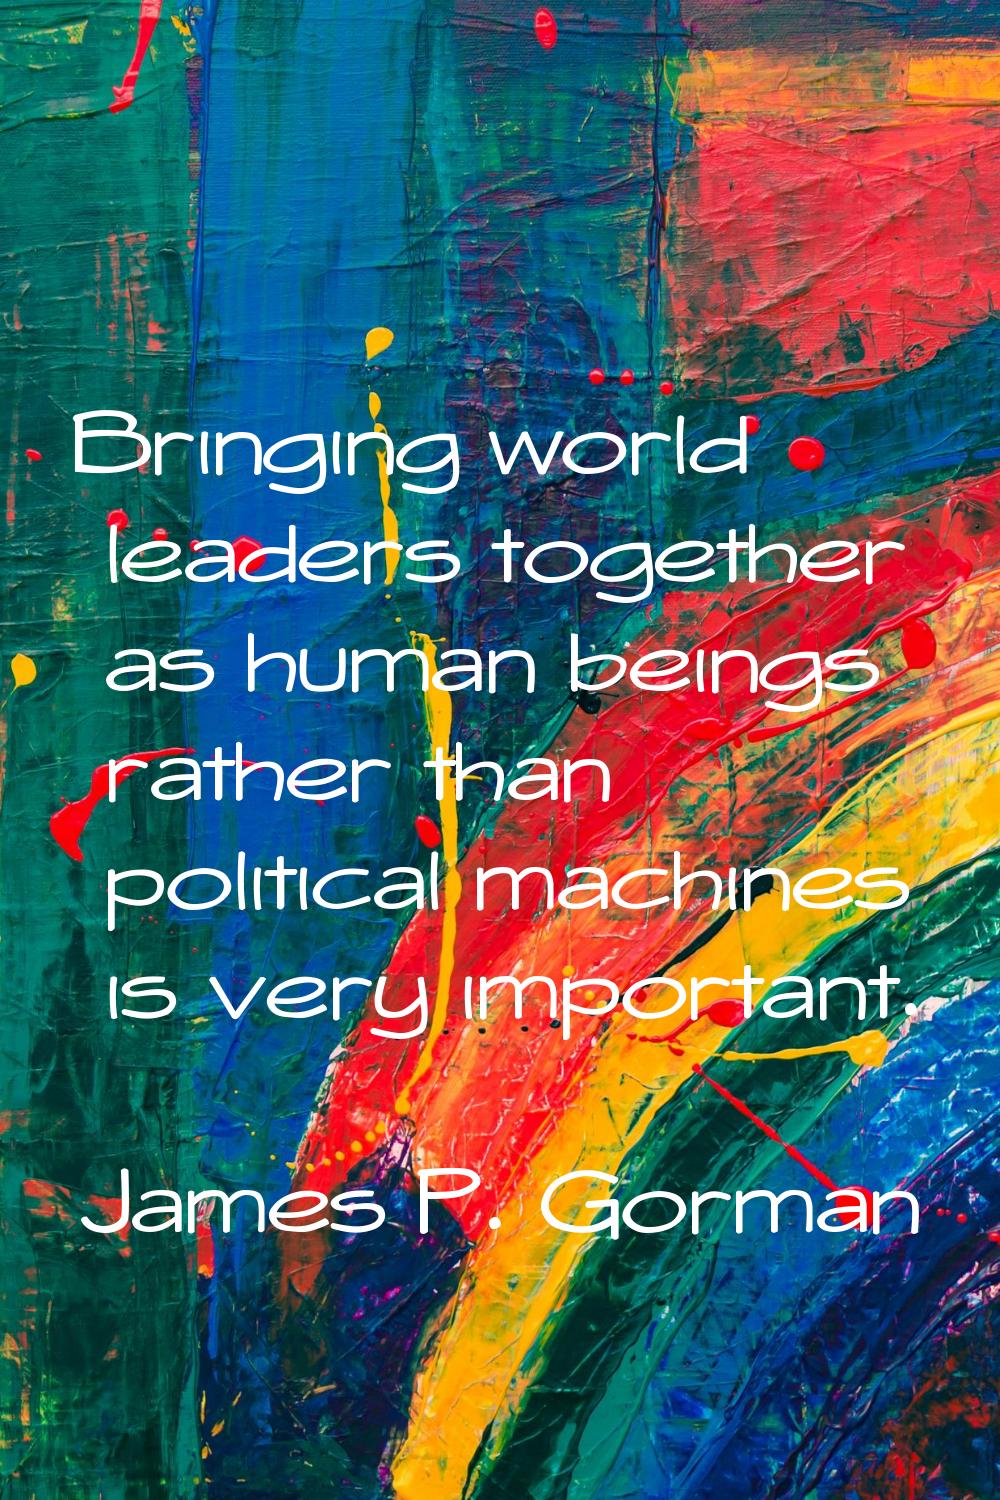 Bringing world leaders together as human beings rather than political machines is very important.